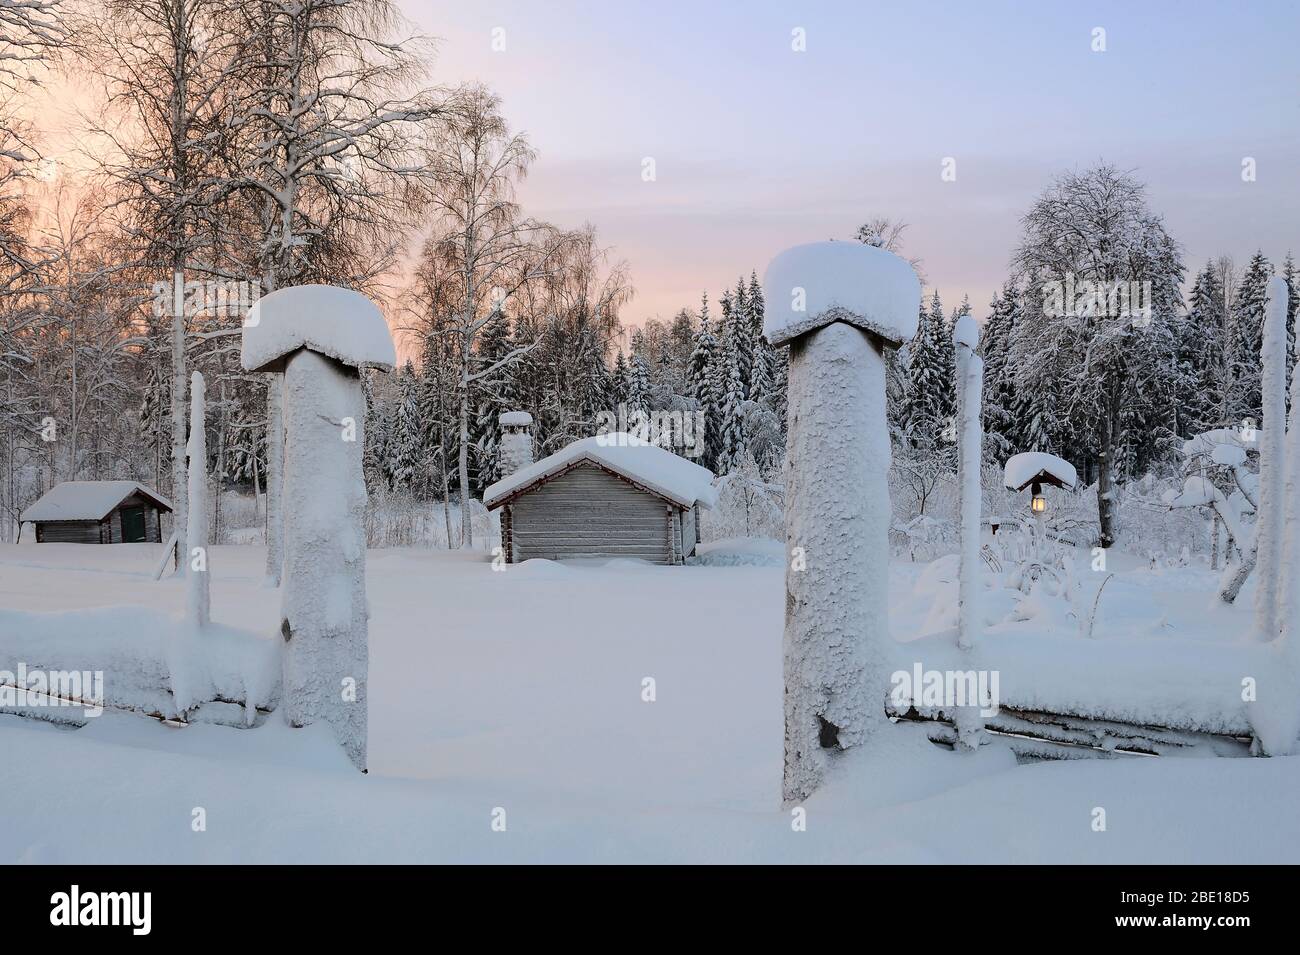 Gatepost and loghouses in a sunsetting winterlandscape Stock Photo